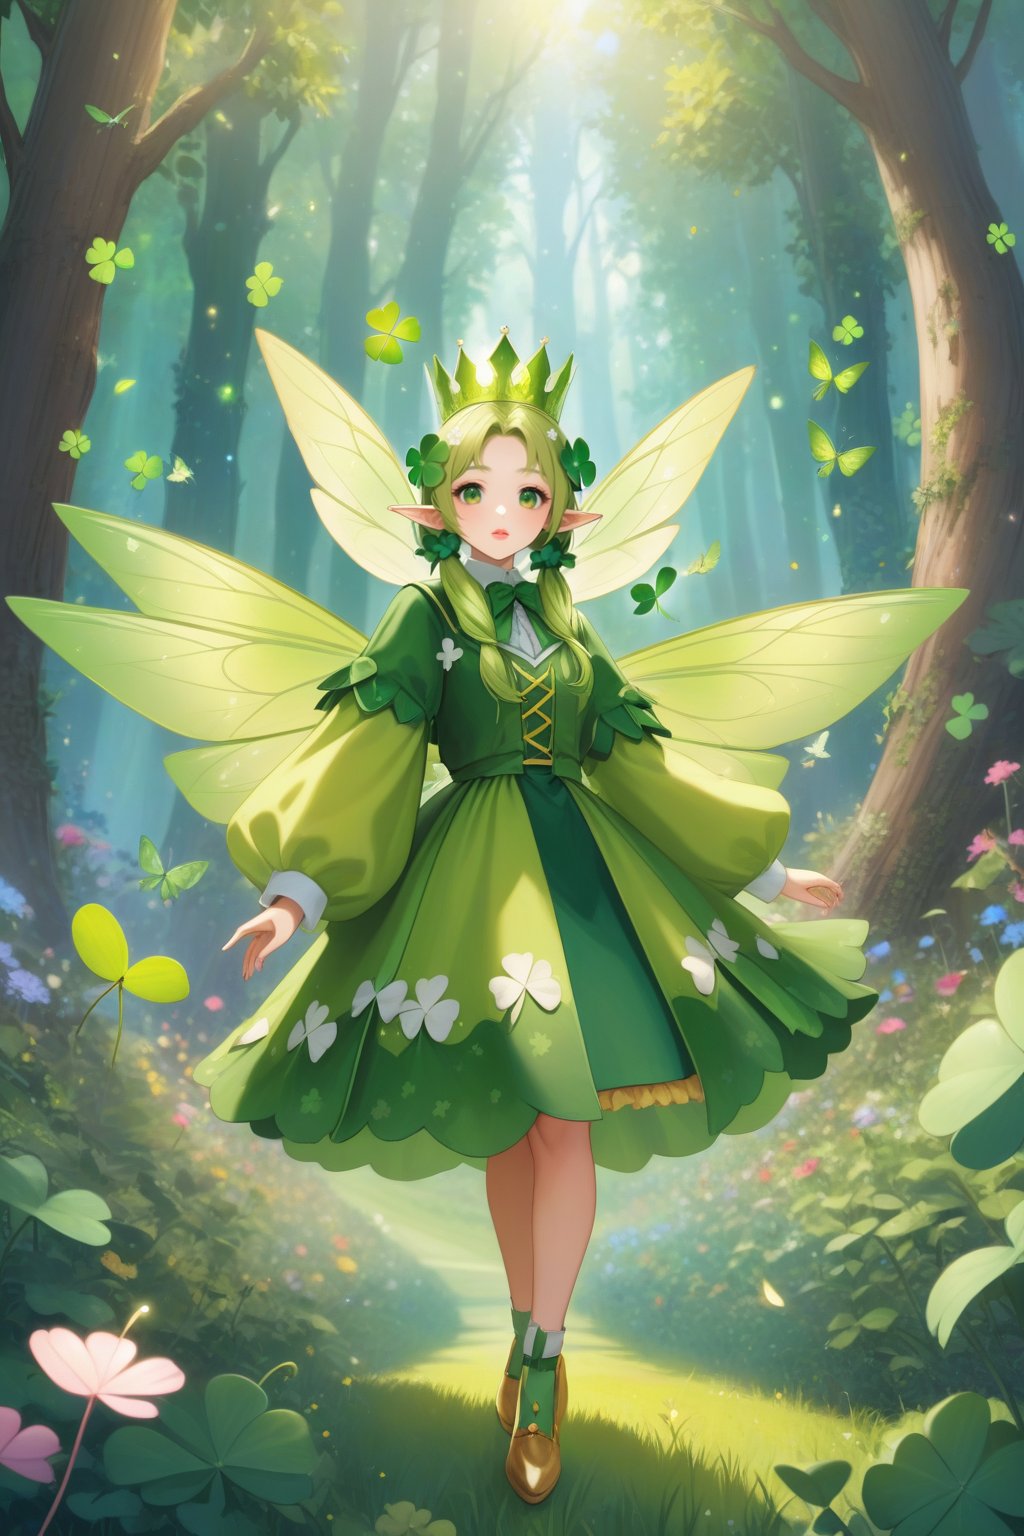 The noble wizard of Oz, dressed in clothes decorated with four-leaf clover and wearing a crown made of four-leaf clover, has beautiful green elf wings and flies and shuttles in the magical forest.